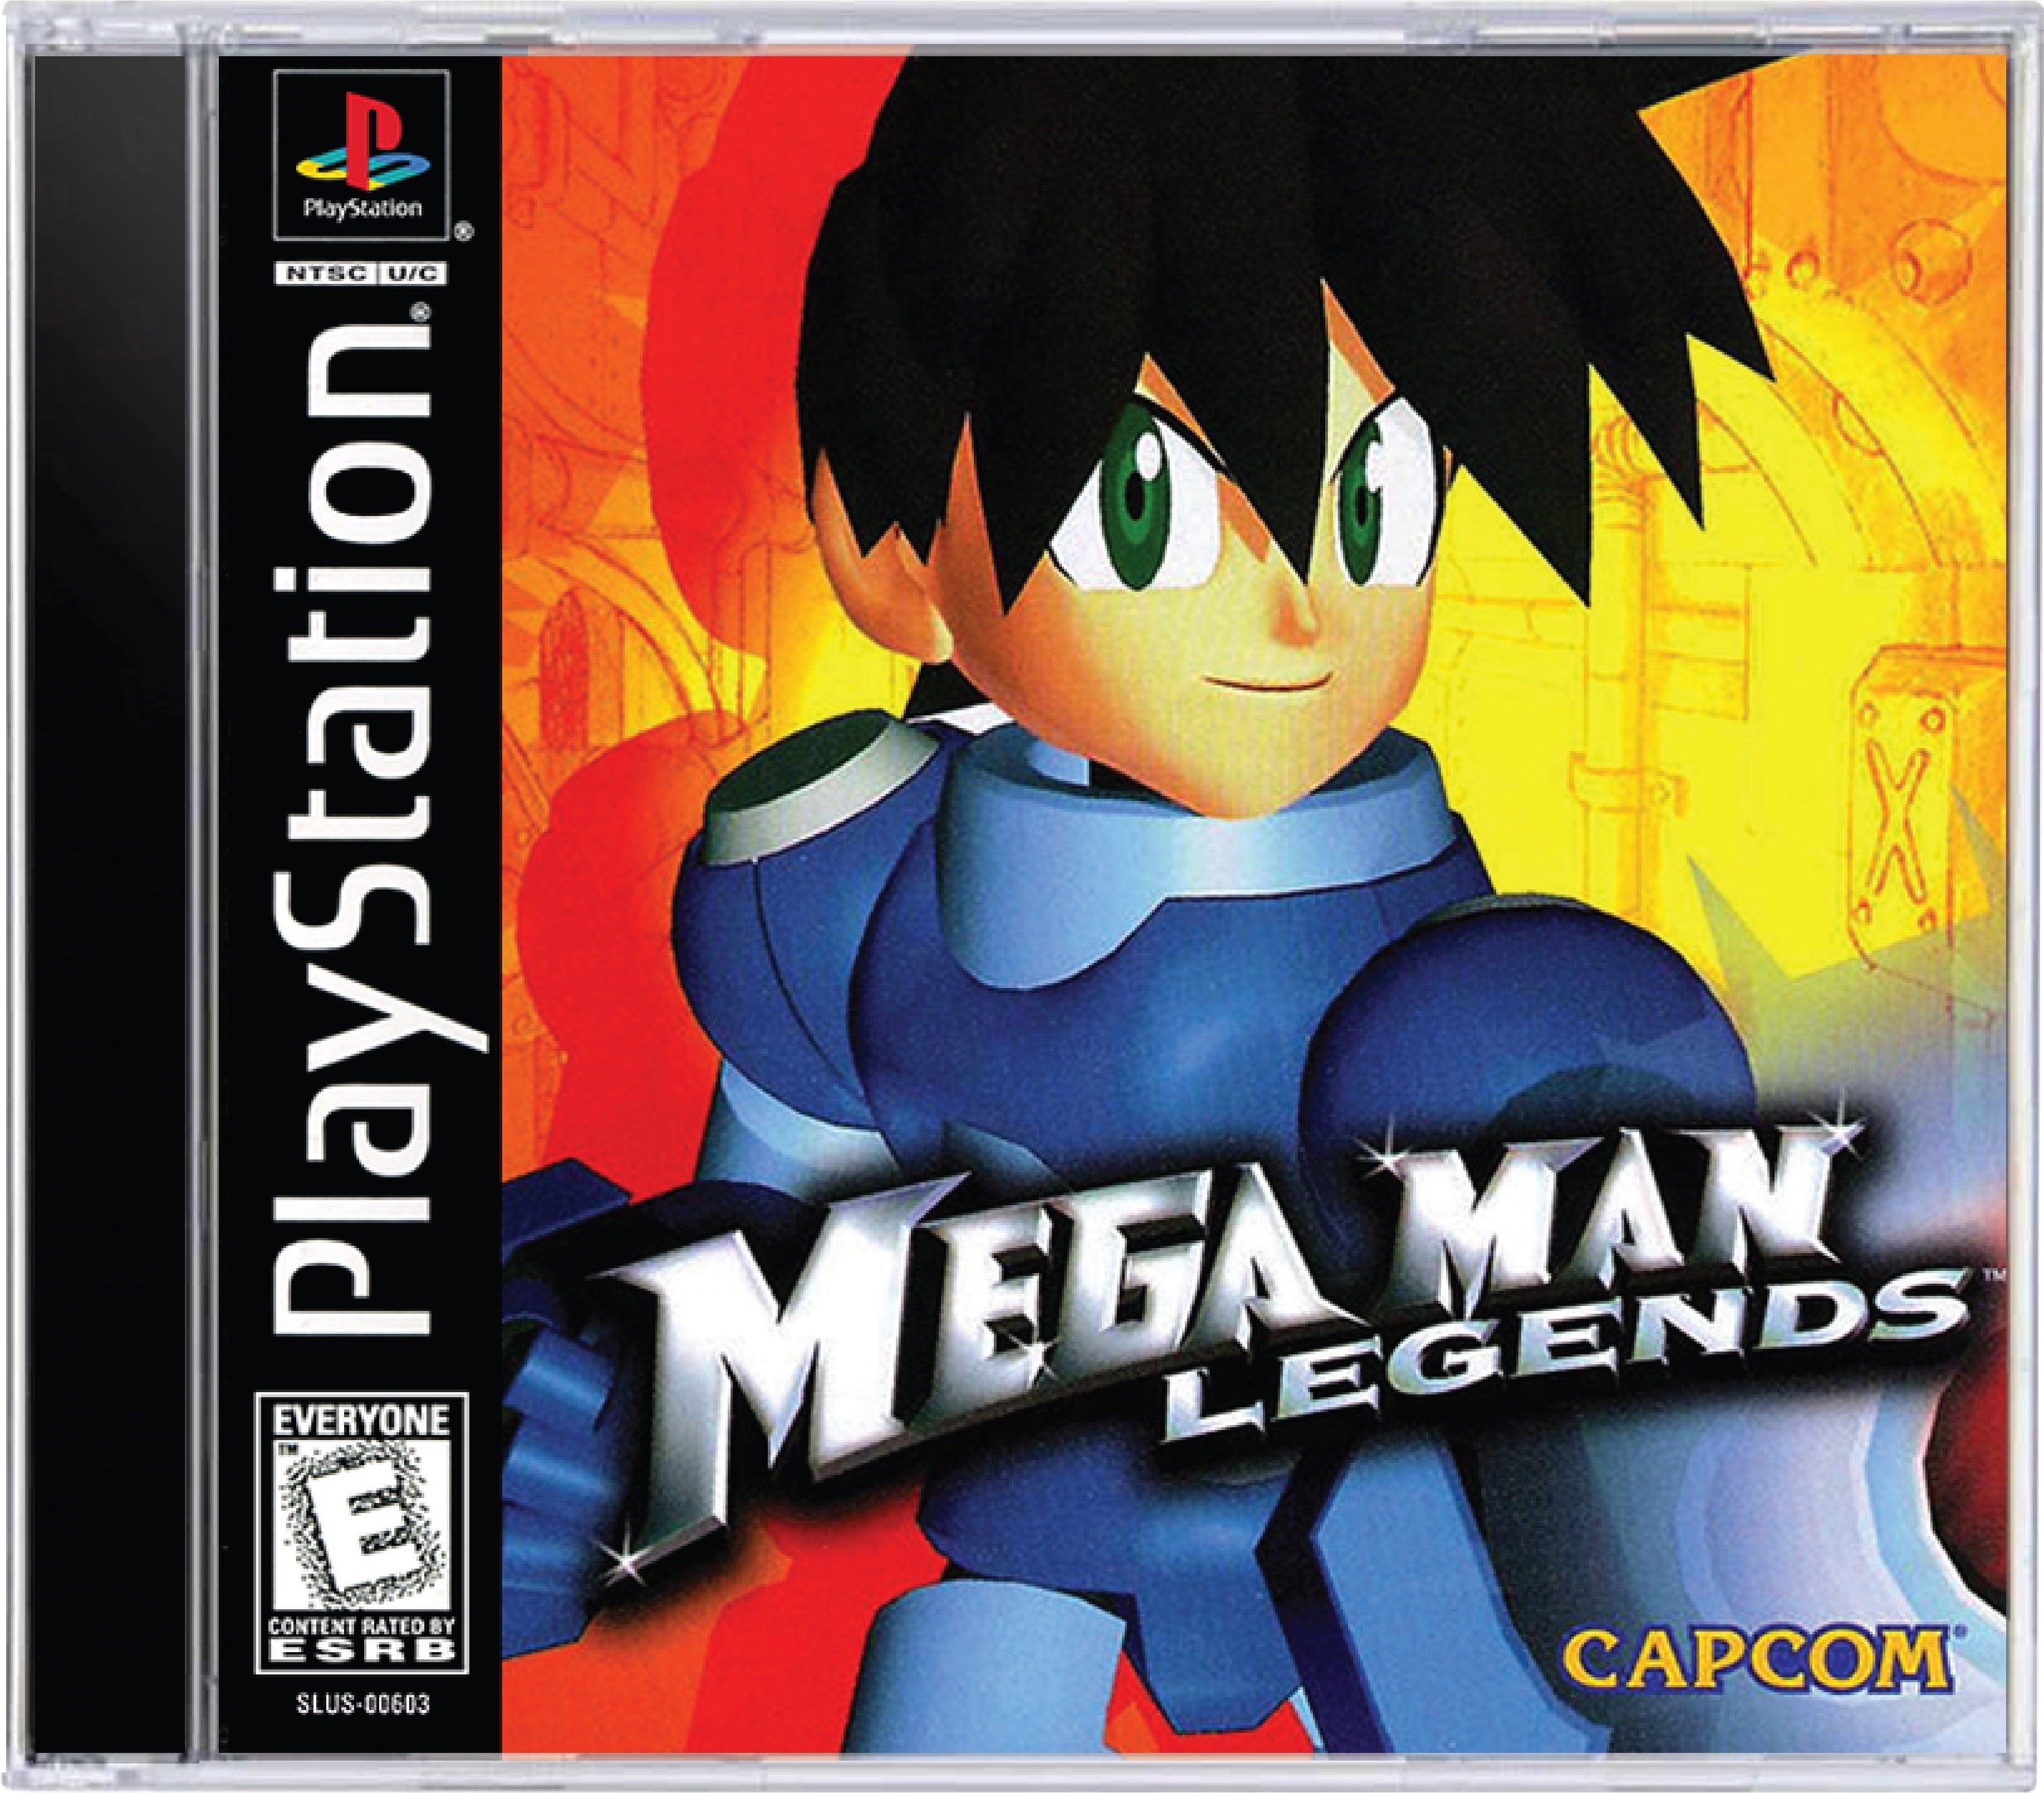 Mega Man Legends Cover Art and Product Photo